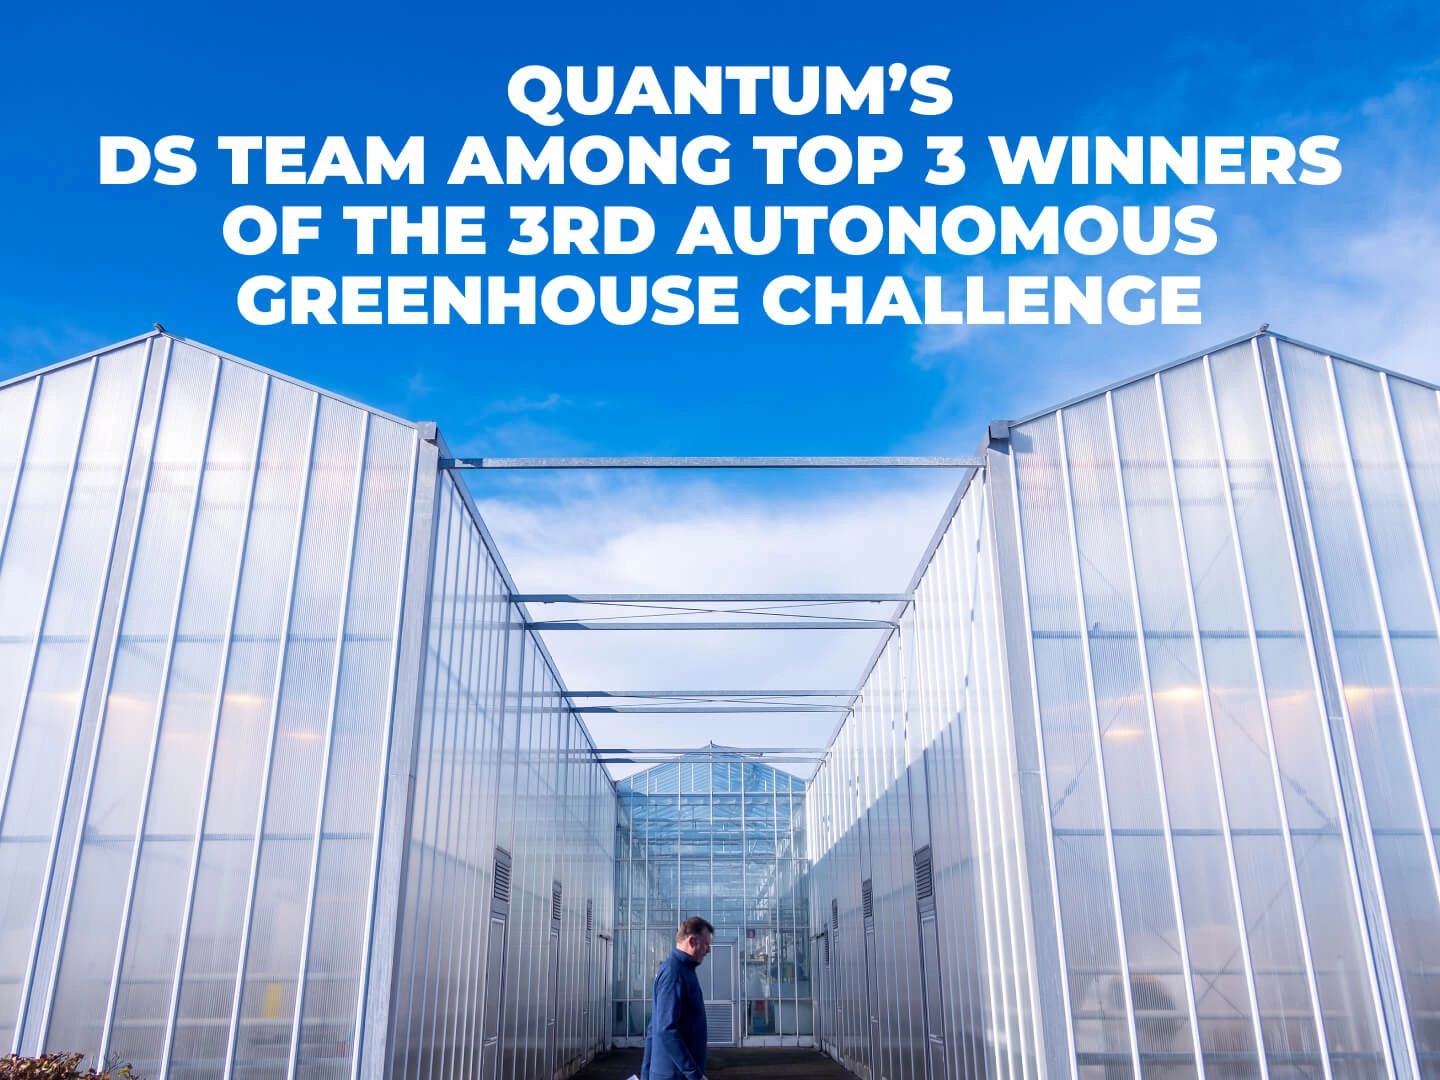 QUANTUM’S-DS-TEAM-AMONG-TOP-3-WINNERS-OF-THE-3RD-AUTONOMOUS-GREENHOUSE-CHALLENGE